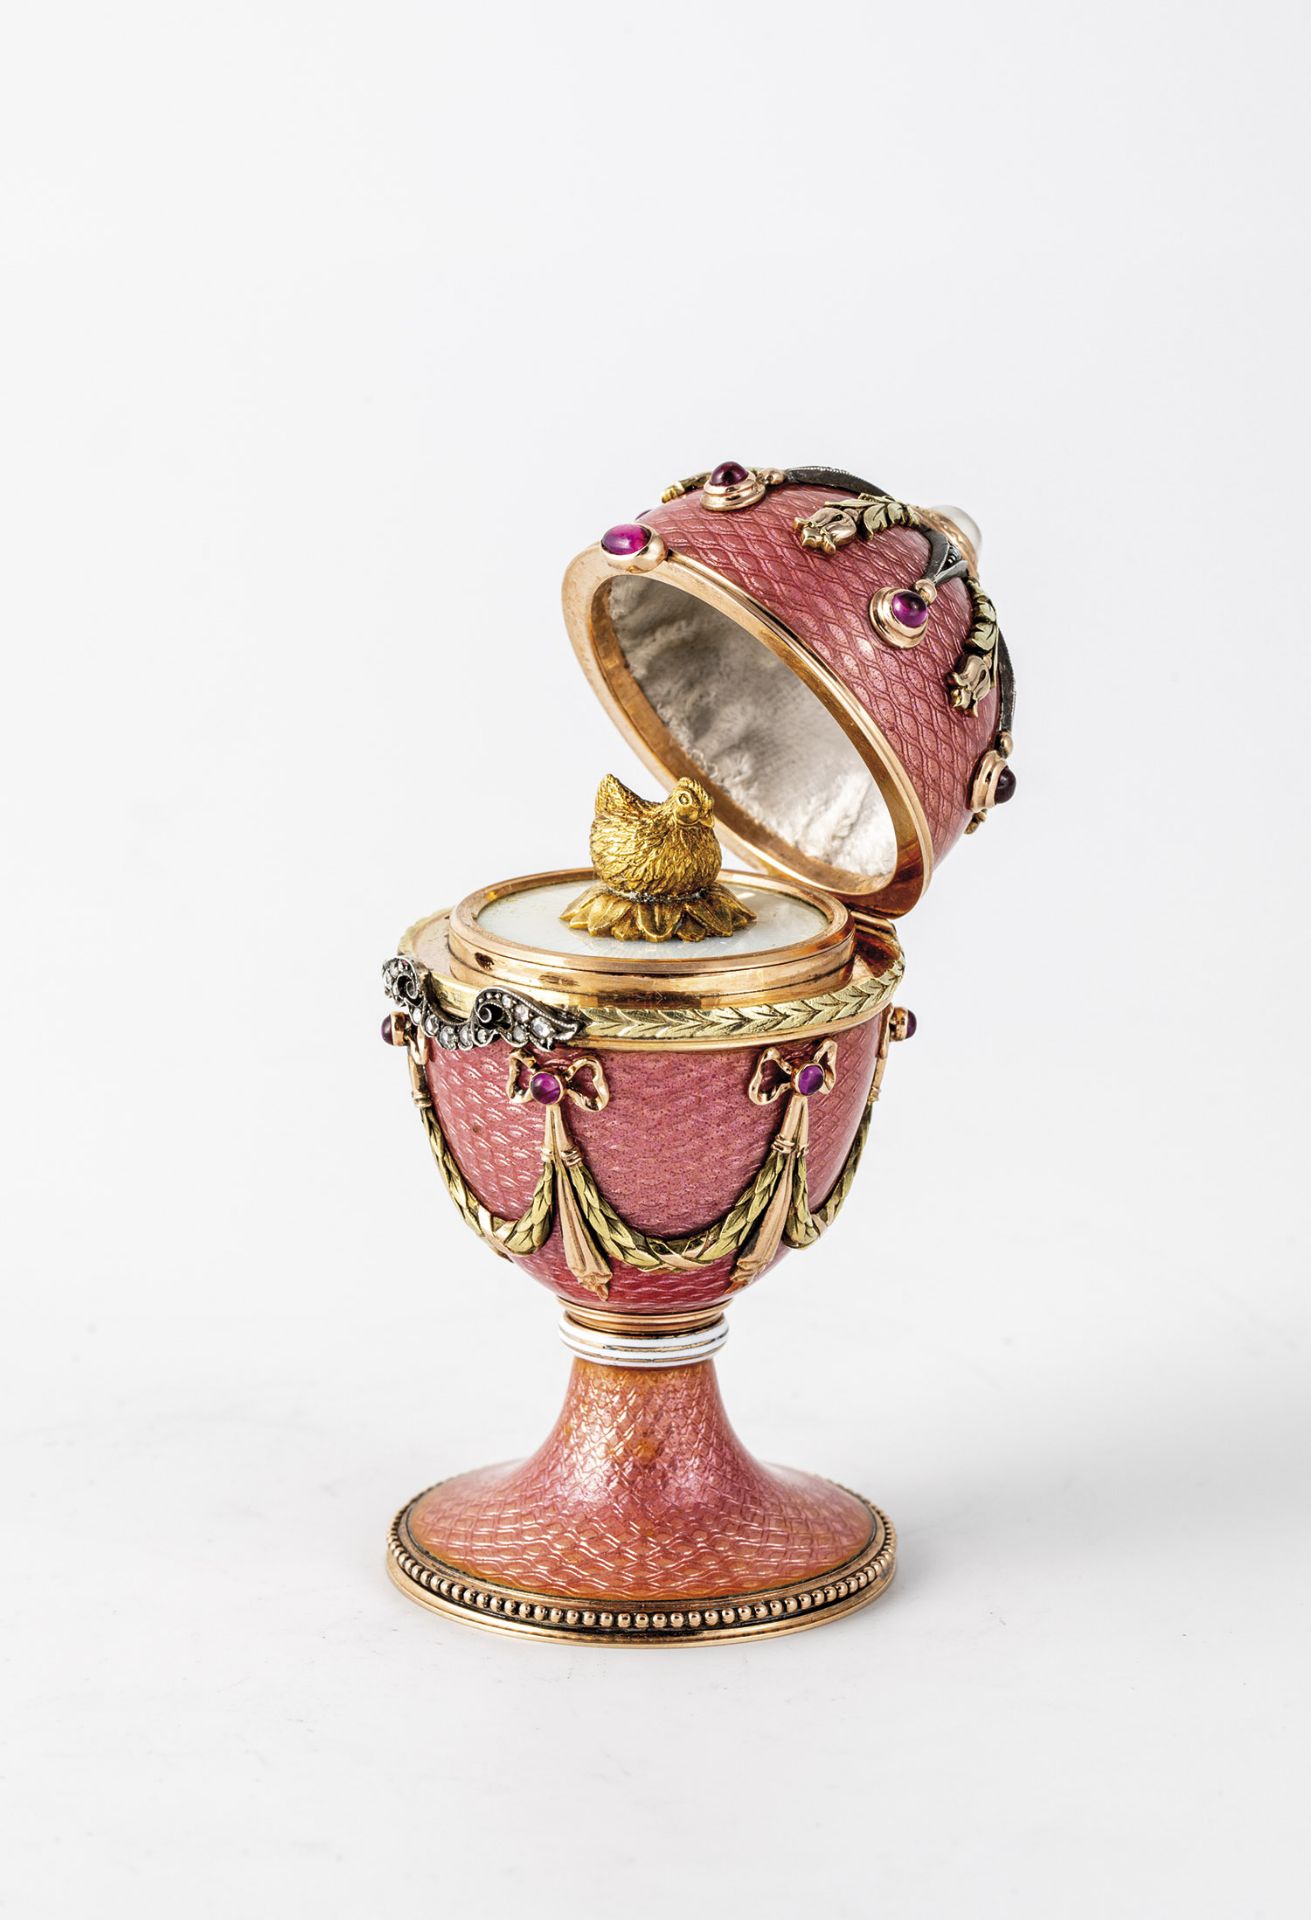 Gold Egg Box with Guilloché Enamel